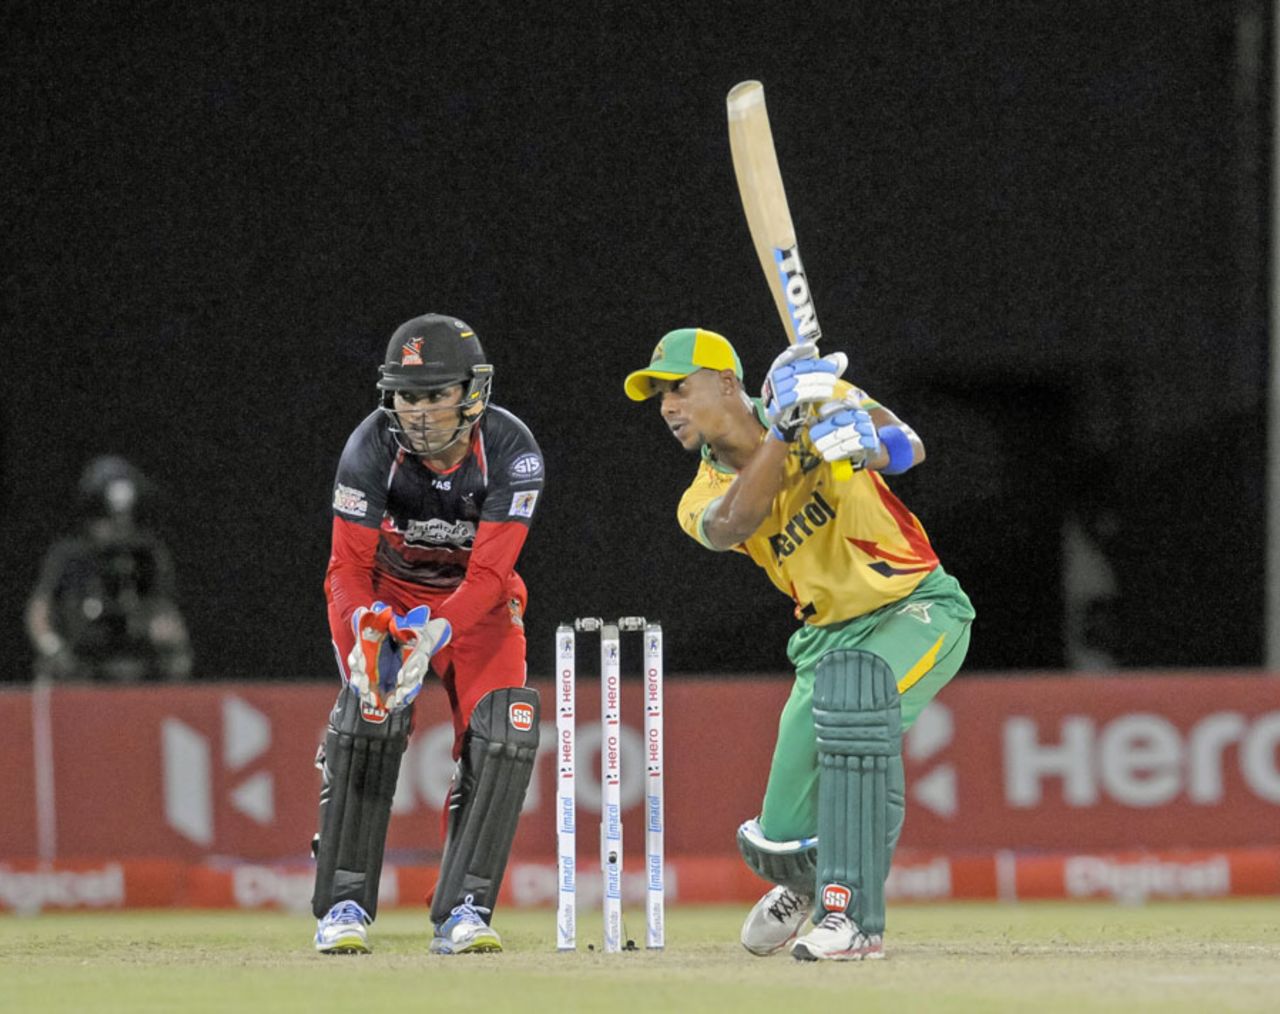 Lendl Simmons plays through the off side during his unbeaten 65, Guyana Amazon Warriors v Trinidad & Tobago Red Steel, CPL 2015, Providence, July 21, 2015